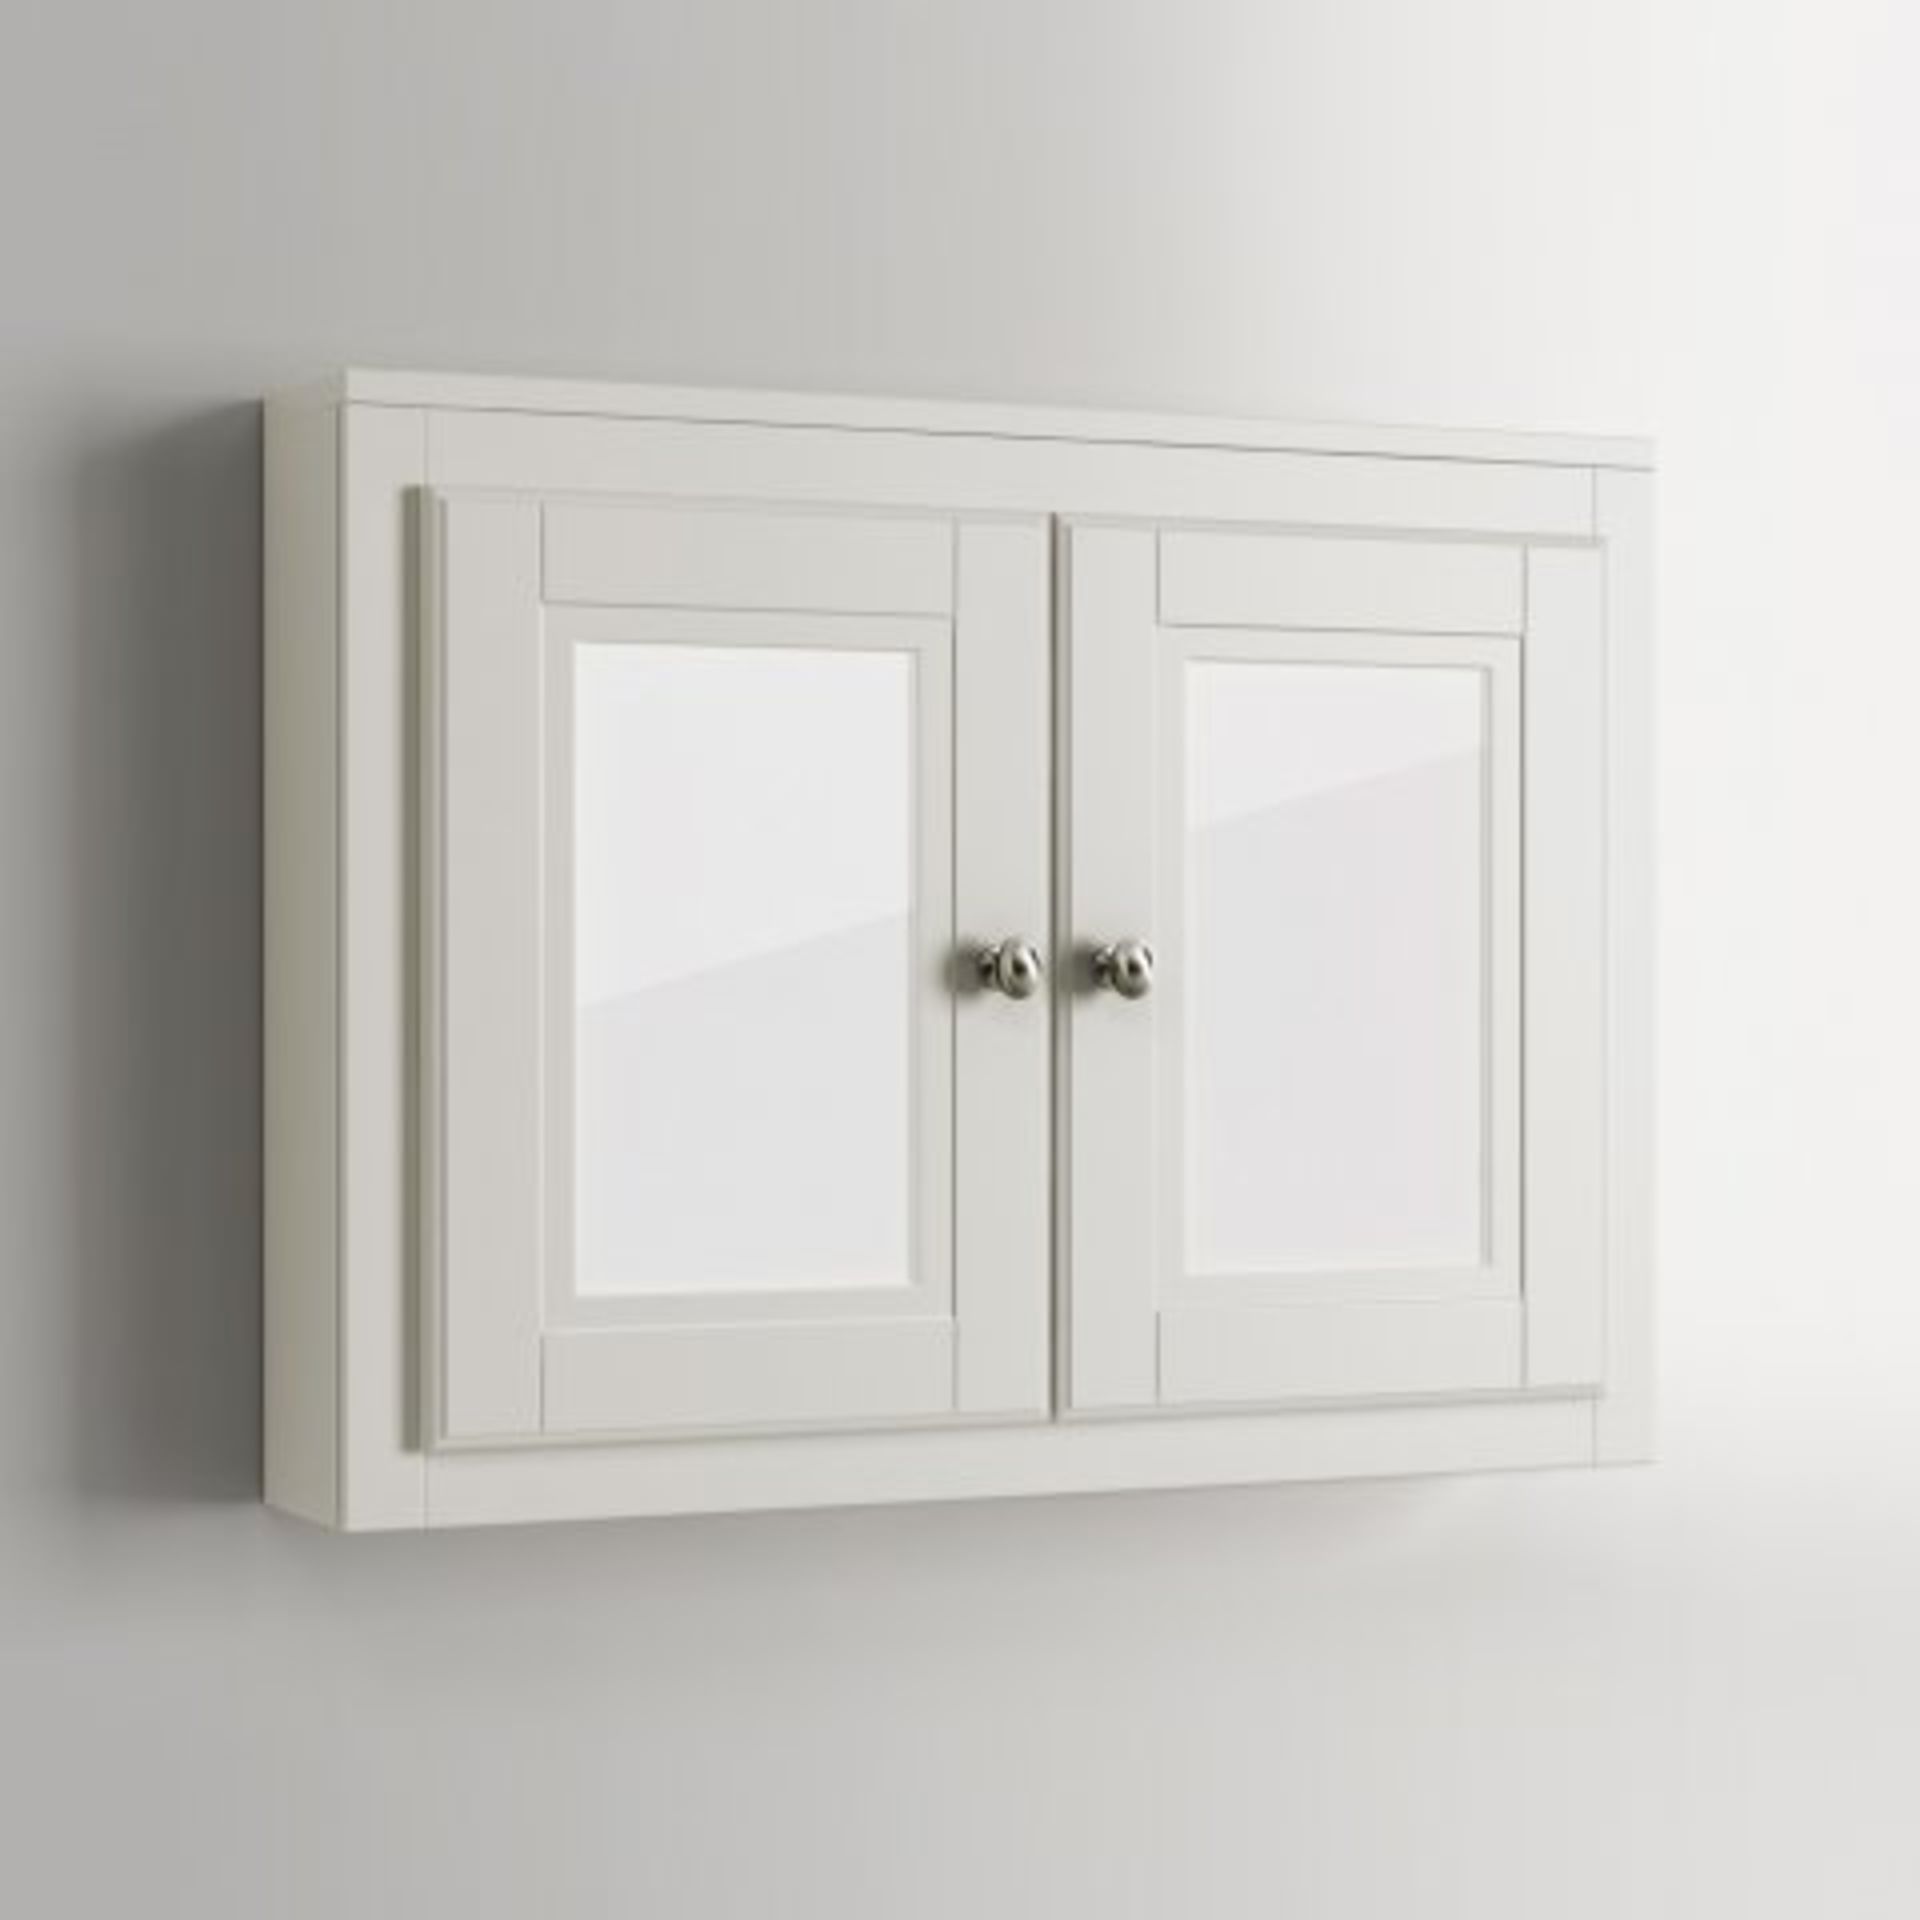 (J37) 800mm Cambridge Clotted Cream Double Door Mirror Cabinet. RRP £299.99. Our Cambridge Clotted - Image 4 of 4